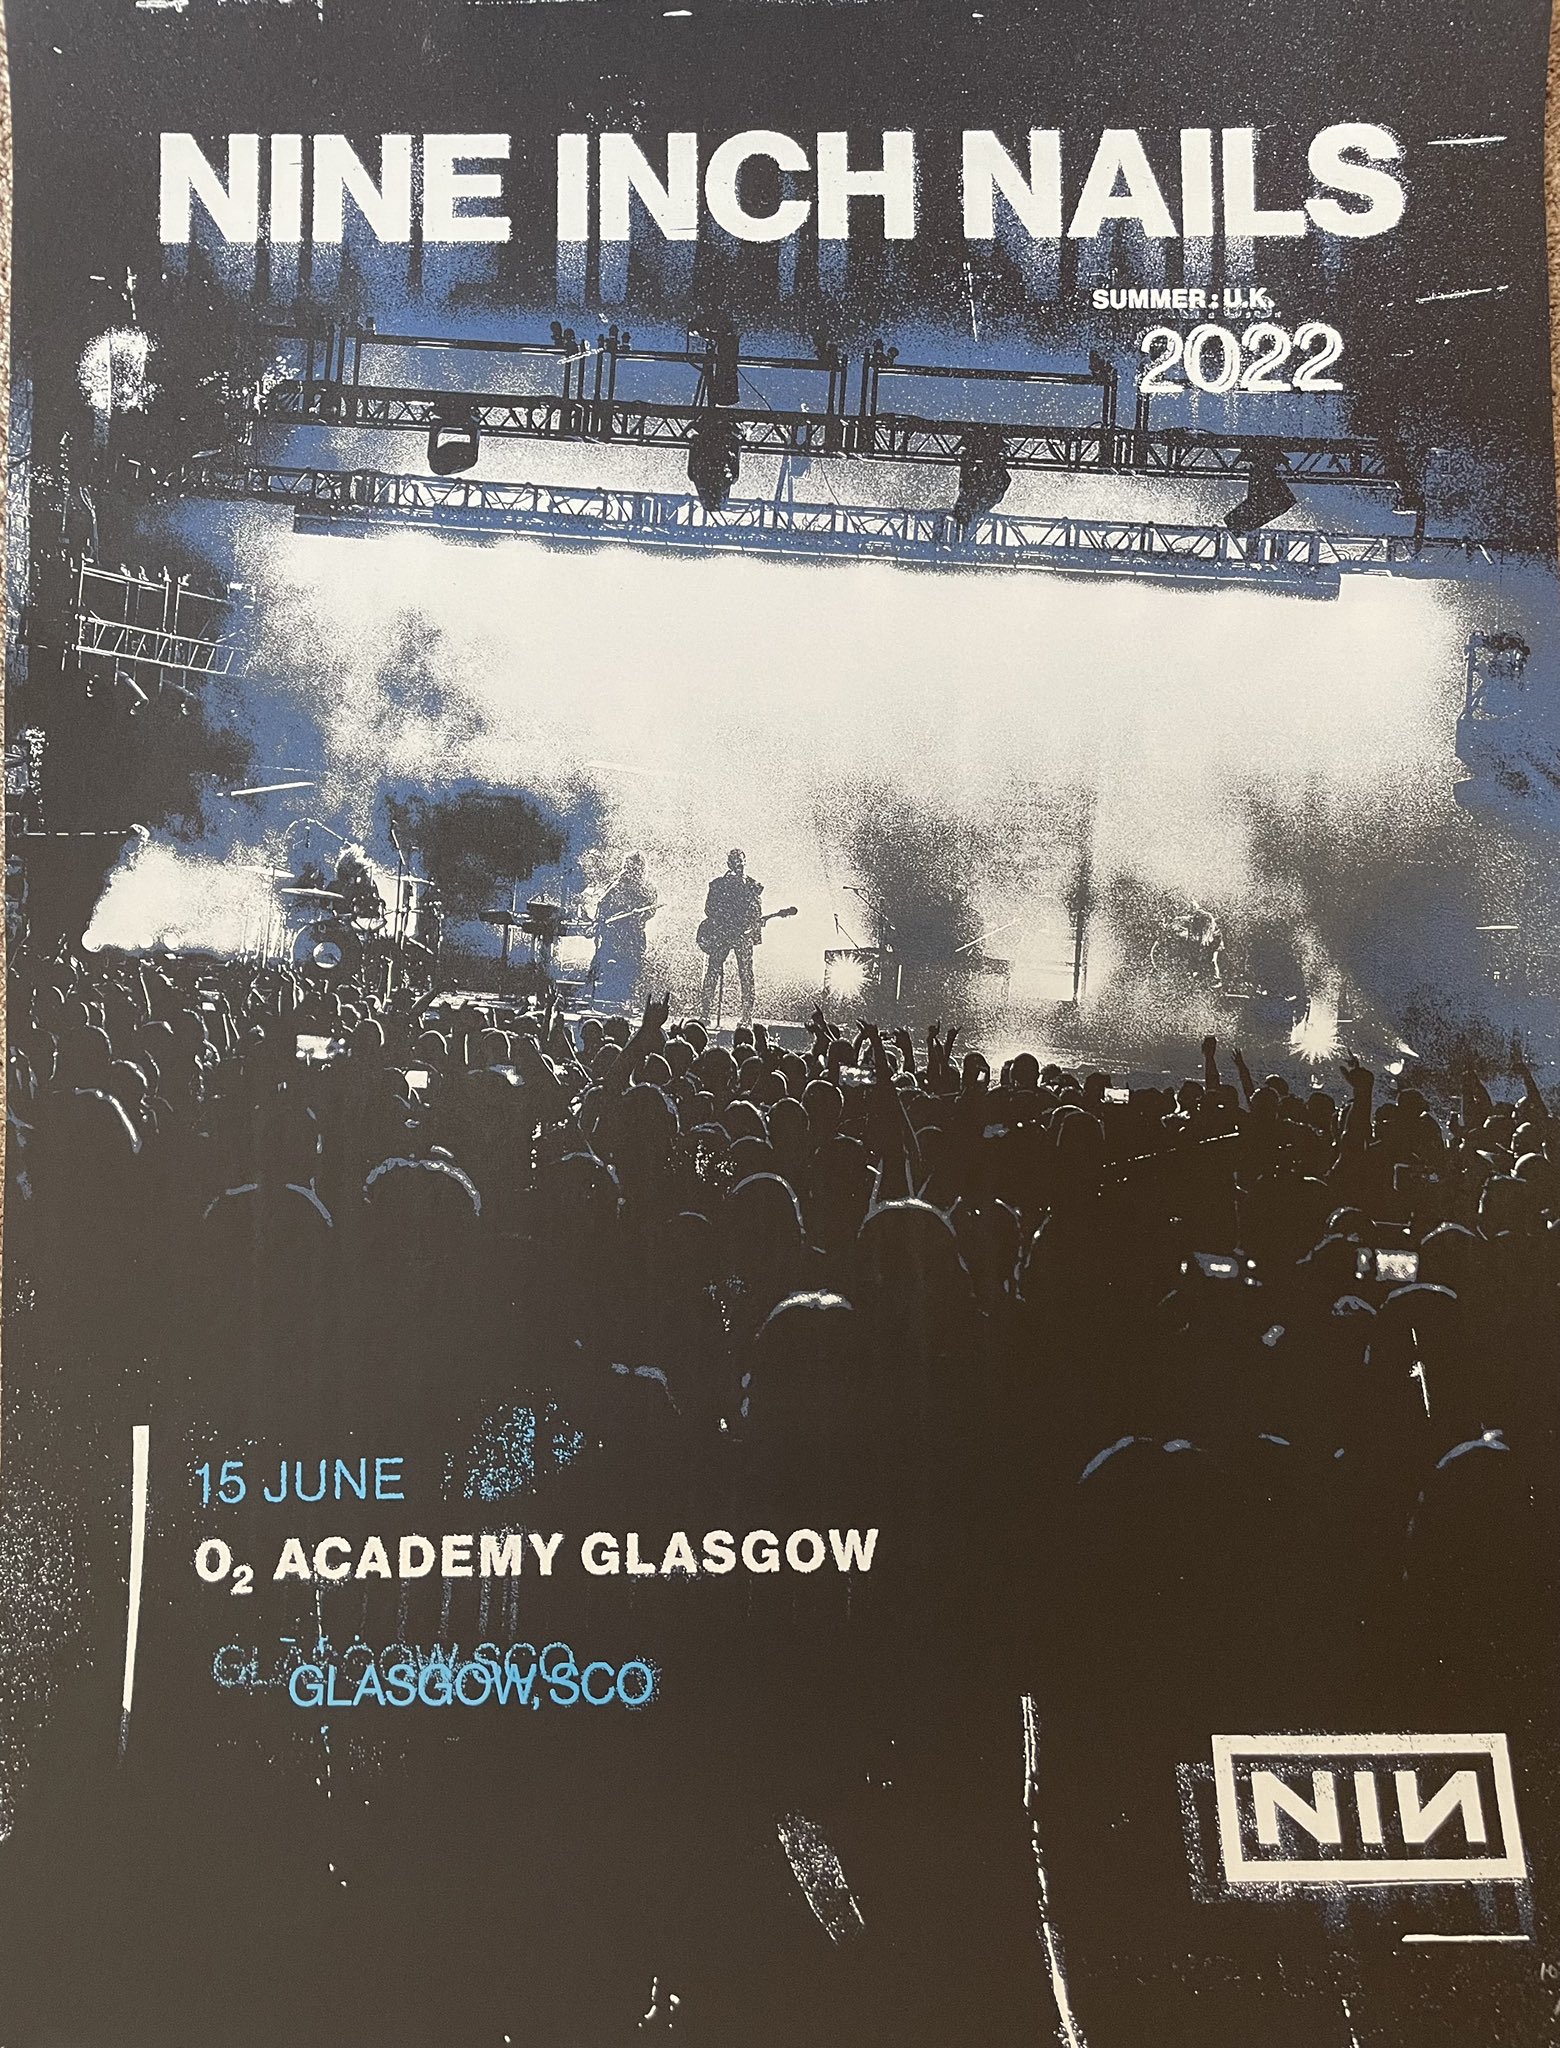 <a href='https://www.ebay.com/sch/i.html?_from=R40&_trksid=p2323012.m570.l1313&_nkw=Nine+Inch+Nails+Poster+Glasgow&_sacat=0&mkcid=1&mkrid=711-53200-19255-0&siteid=0&campid=5336302525&customid=poster&toolid=10001&mkevt=1'>Buy this Poster!</a>